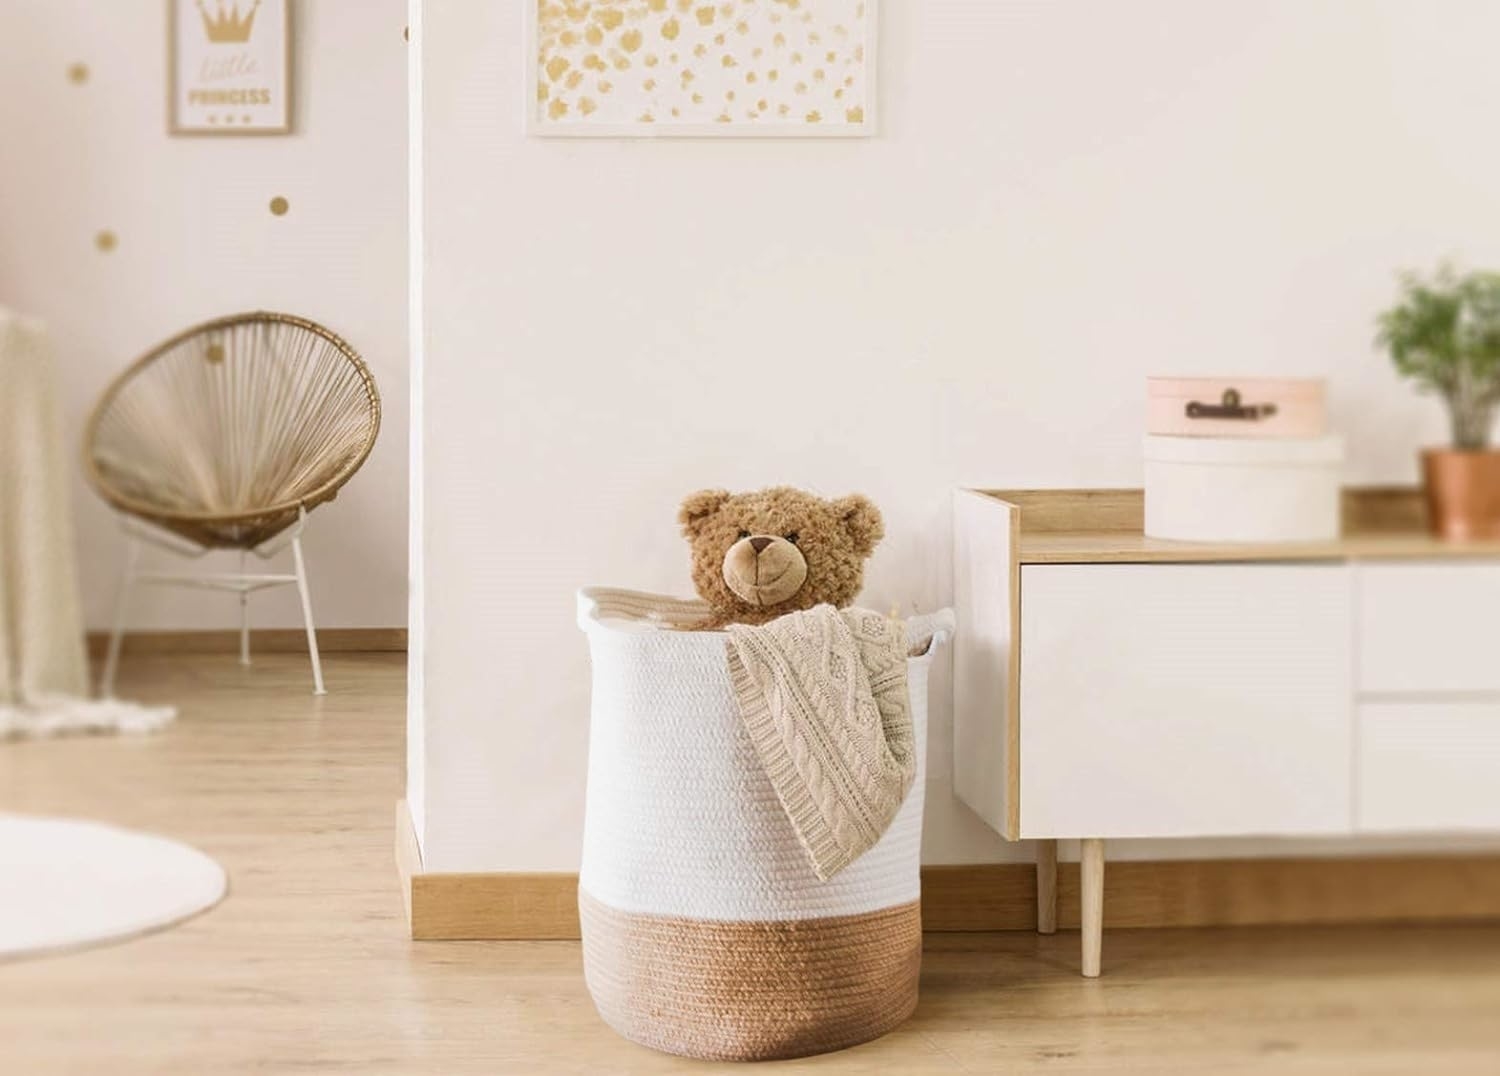 the woven basket holding a blanket and a teddy bear